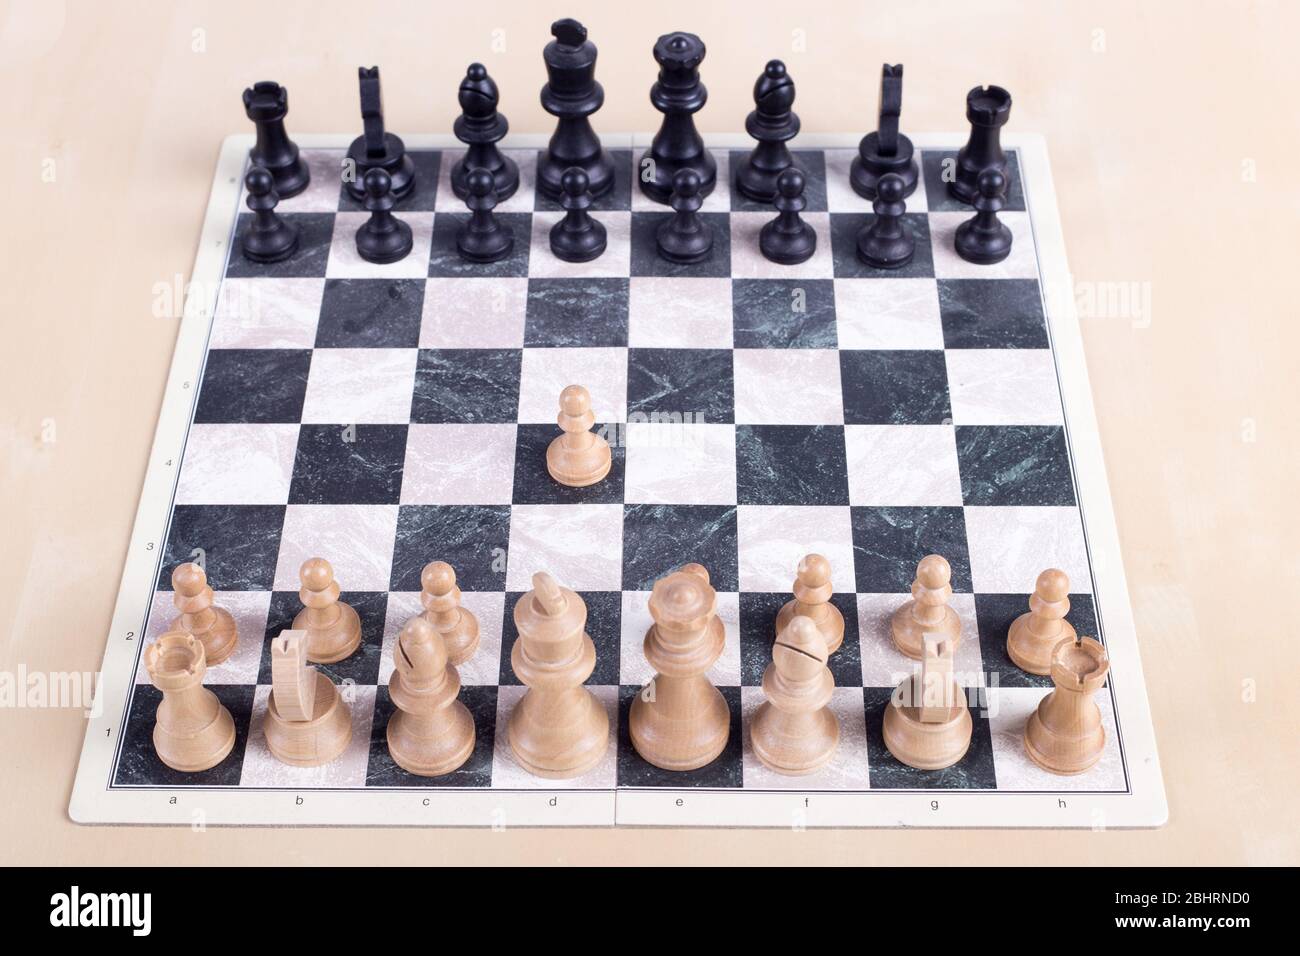 Pieces In Positions Of Power: A Chess Analogy